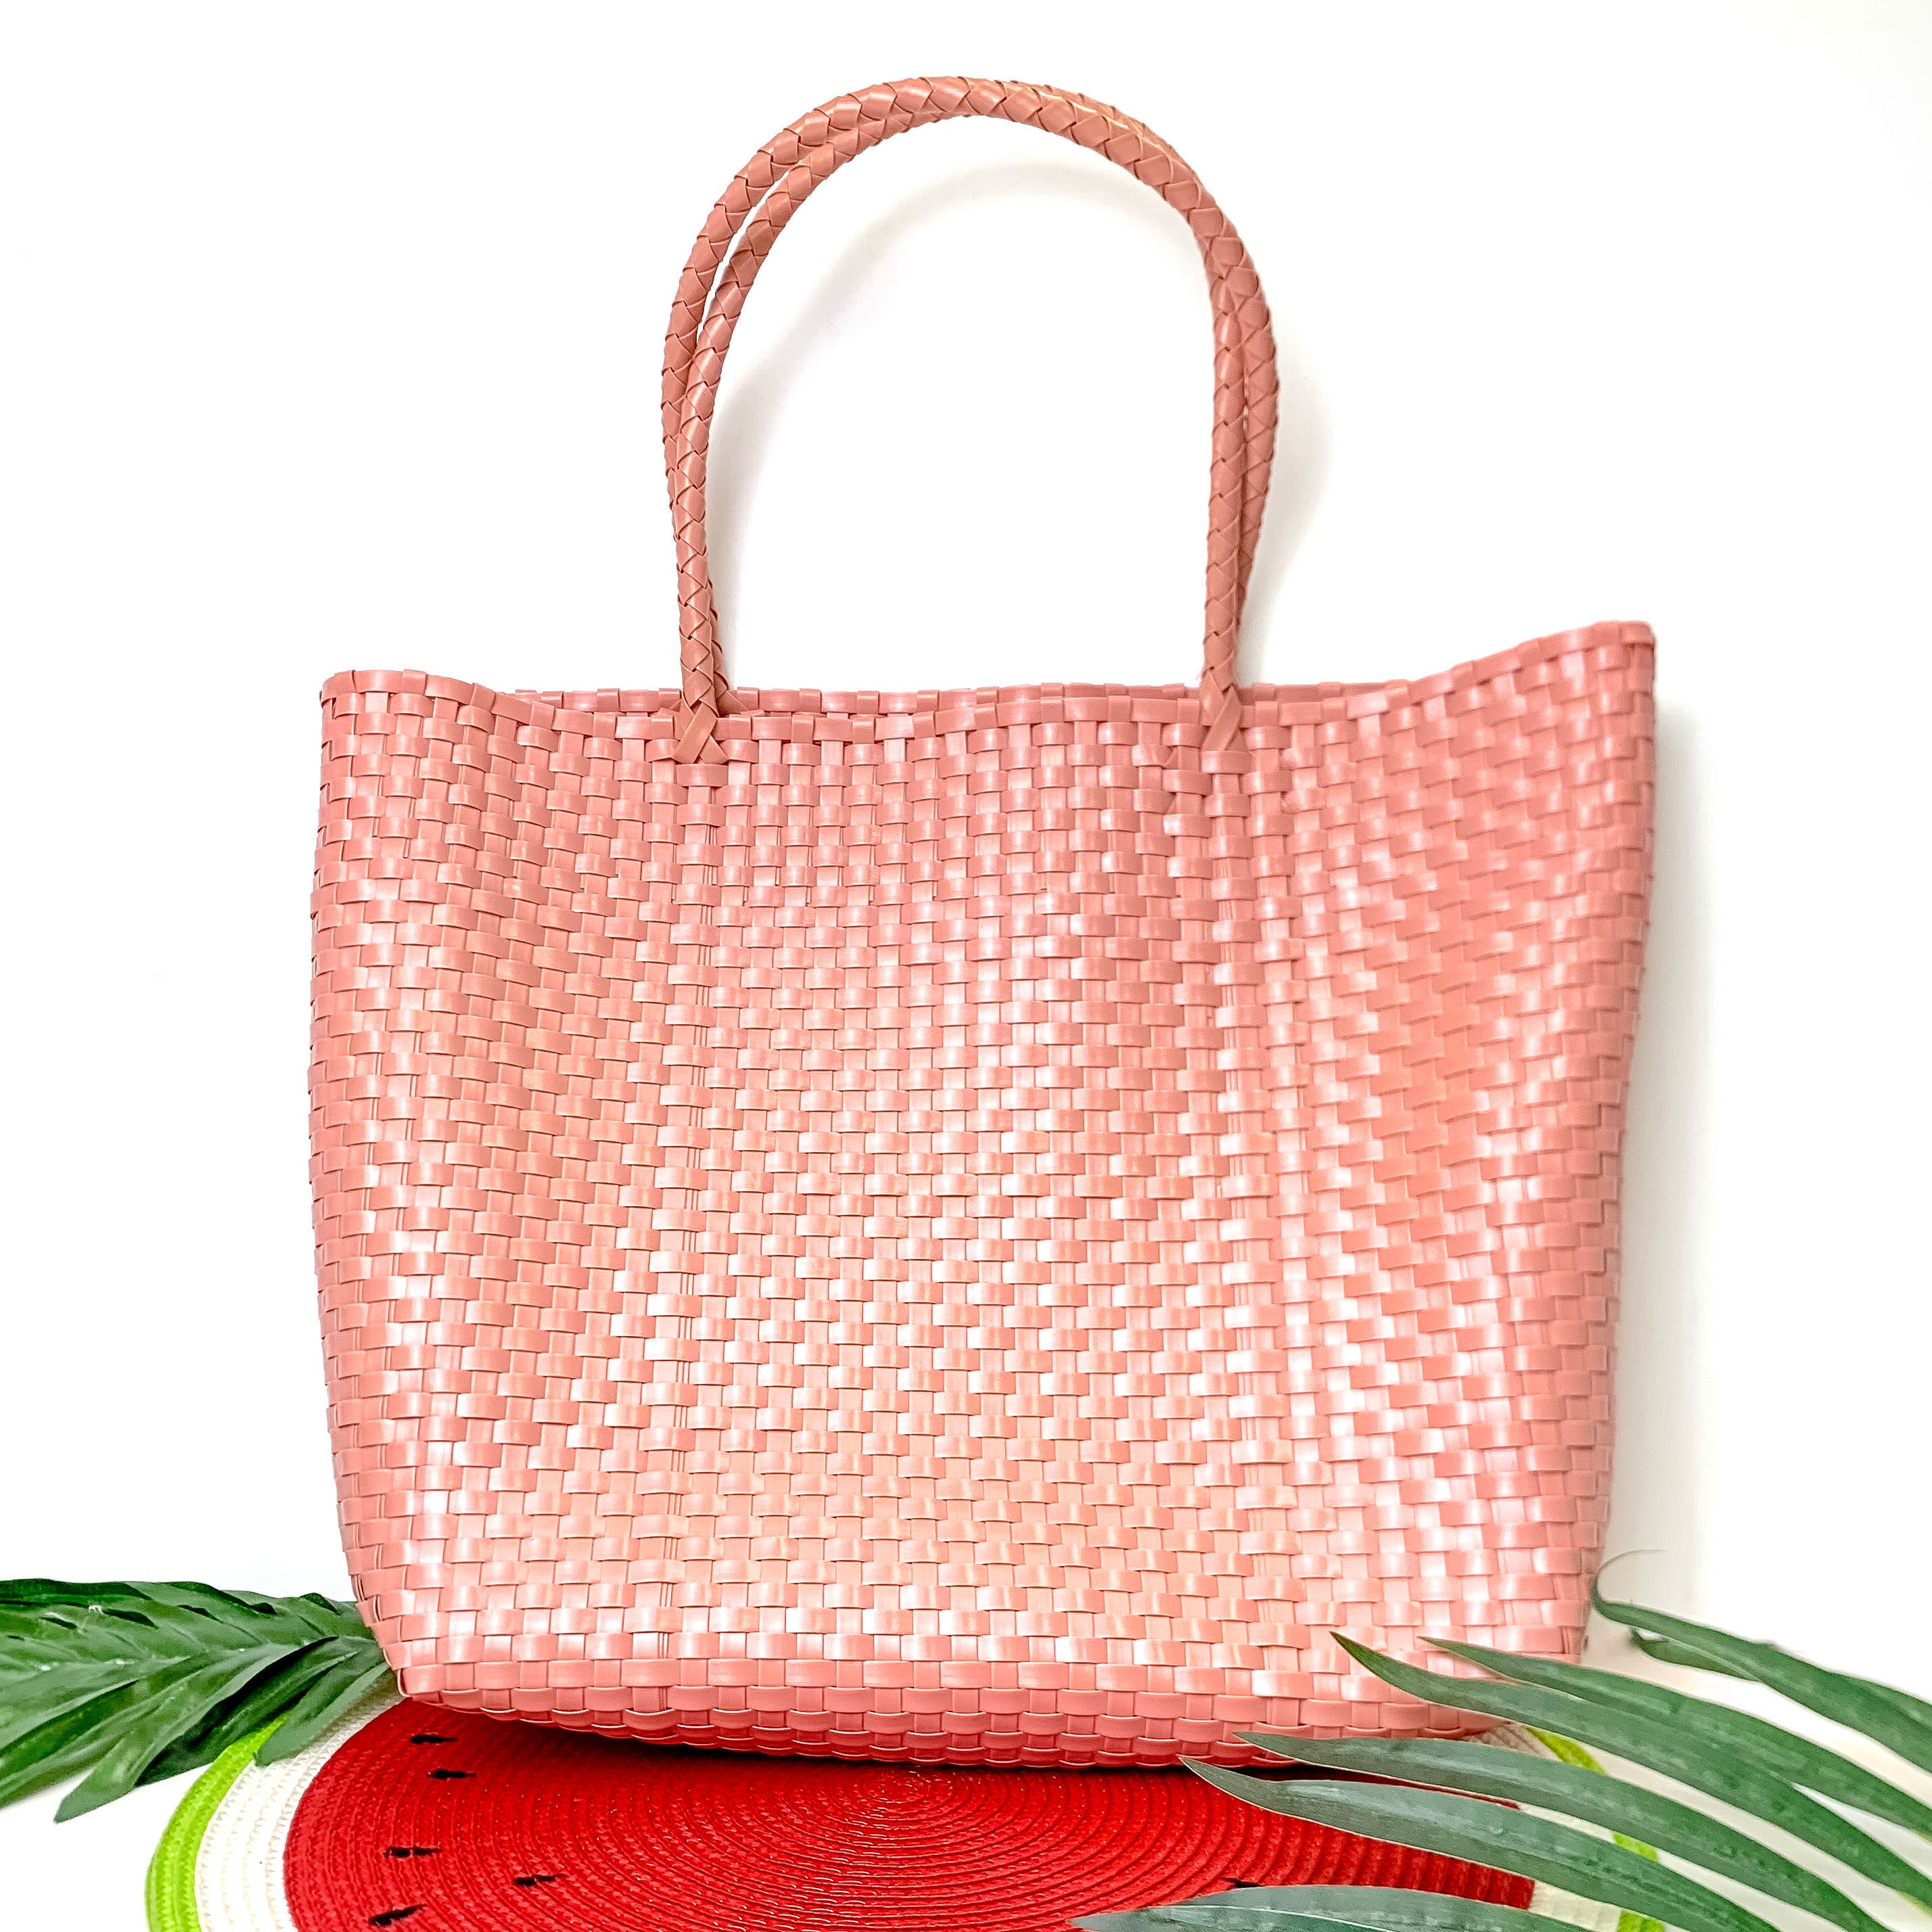 Coastal Couture Carryall Tote Bag in Dusty Coral Pink